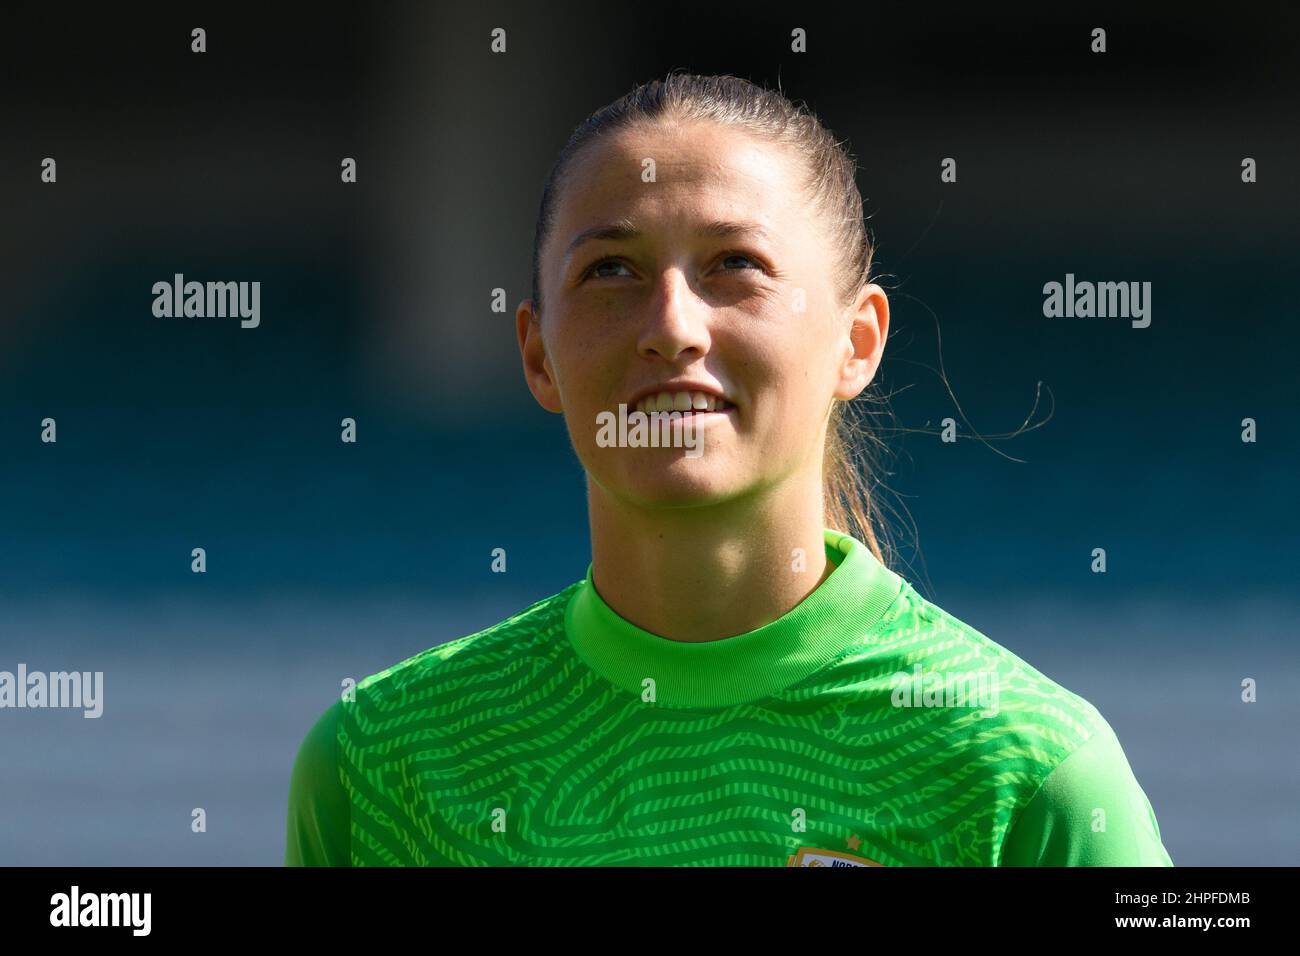 Faro, Portugal. 20th Feb, 2022. Faro, Portugal, Feb 20th 2022: Cecilie Fiskerstrand (1 Goalkeeper of Norway) before the Algarve Cup match between Italy and Norway at Estadio Algarve, Portugal. Sven Beyrich/SPP Credit: SPP Sport Press Photo. /Alamy Live News Stock Photo